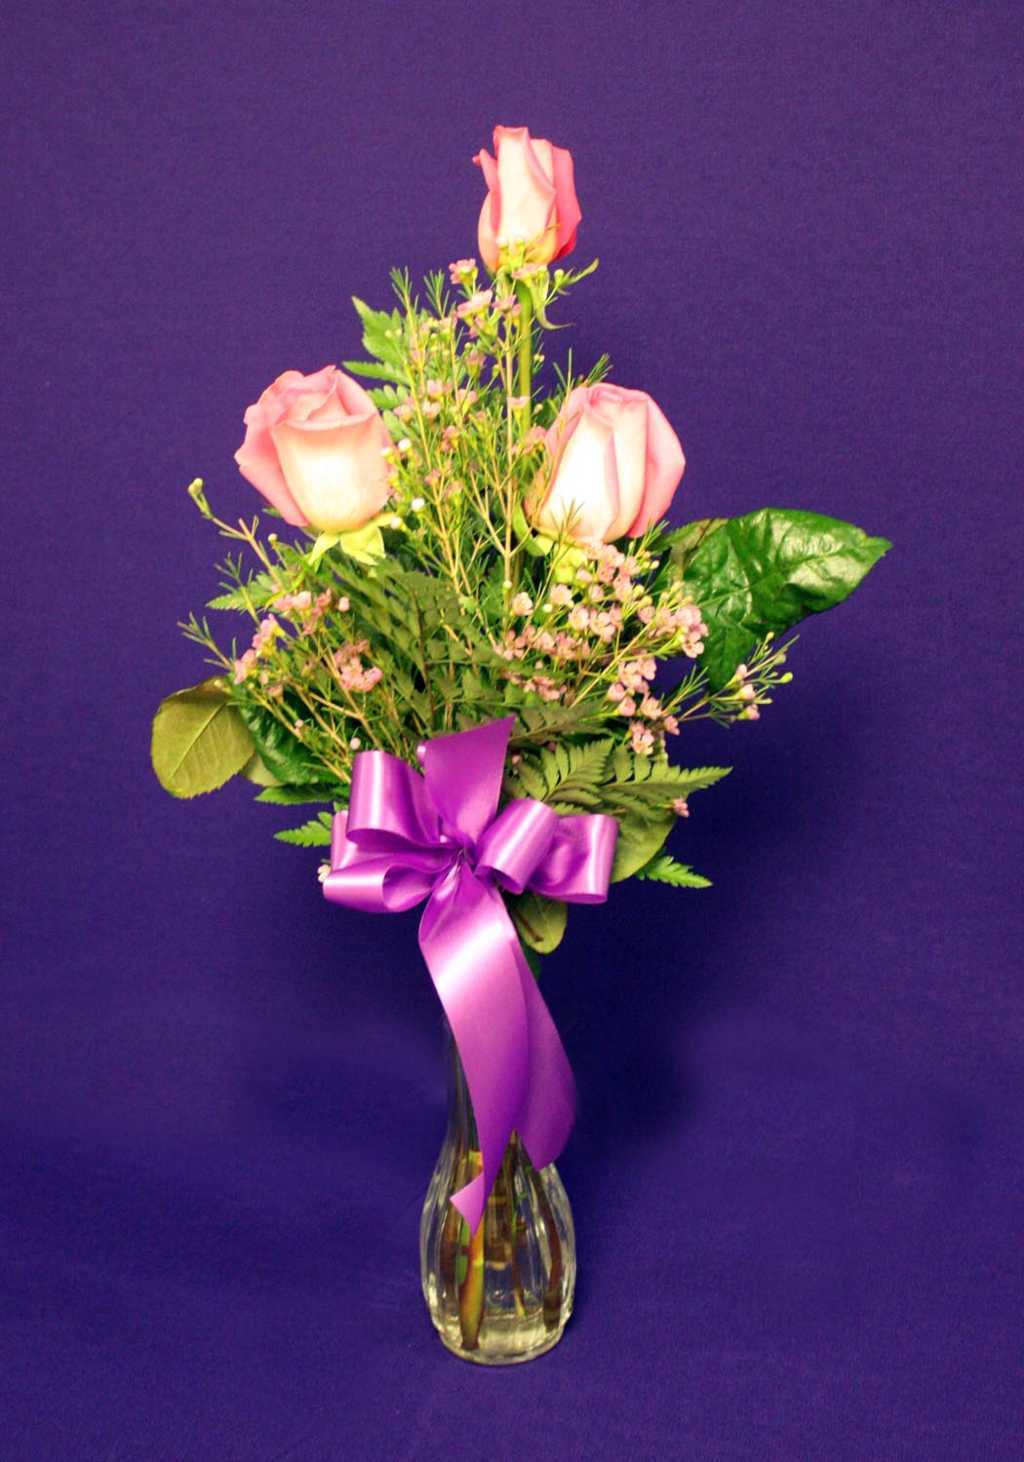 Pink Roses with purple ribbon floral arrangement from Mon General Hospital Gift Shop